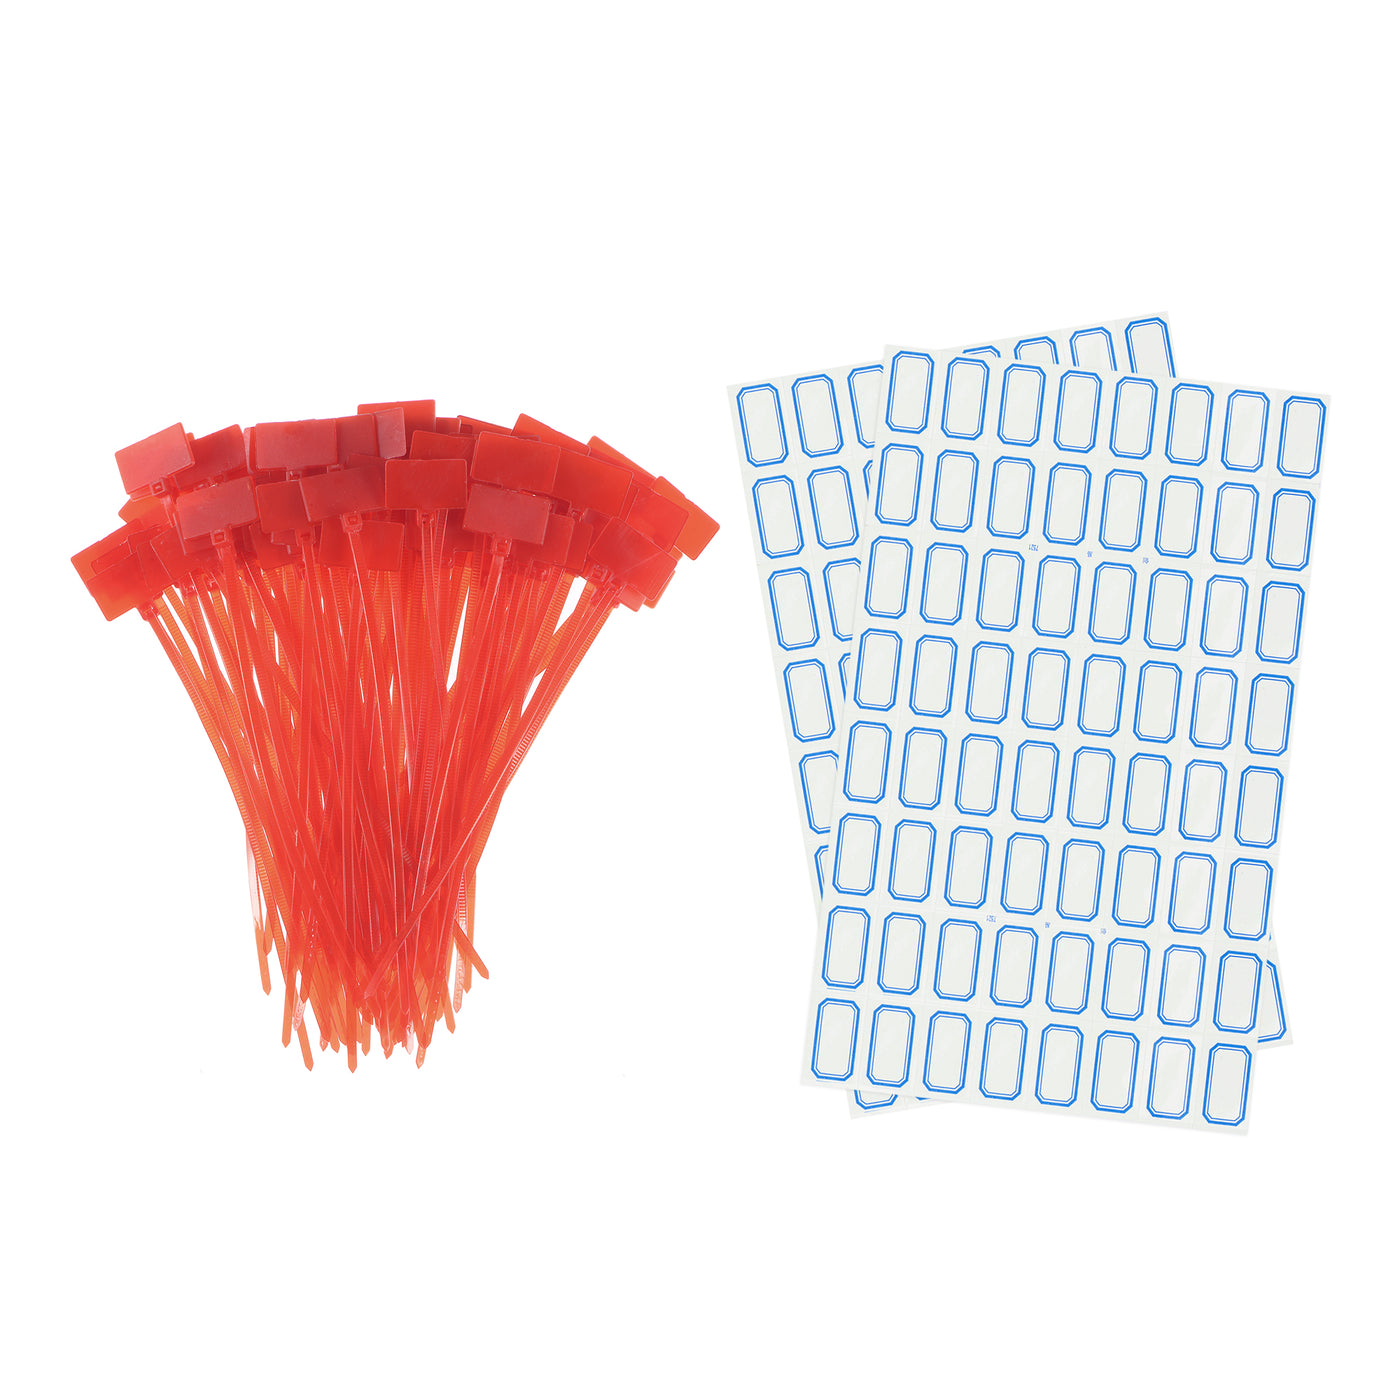 uxcell Uxcell 100pcs Nylon Cable Ties Tags Label Marker Self-Locking for Marking Organizing Red